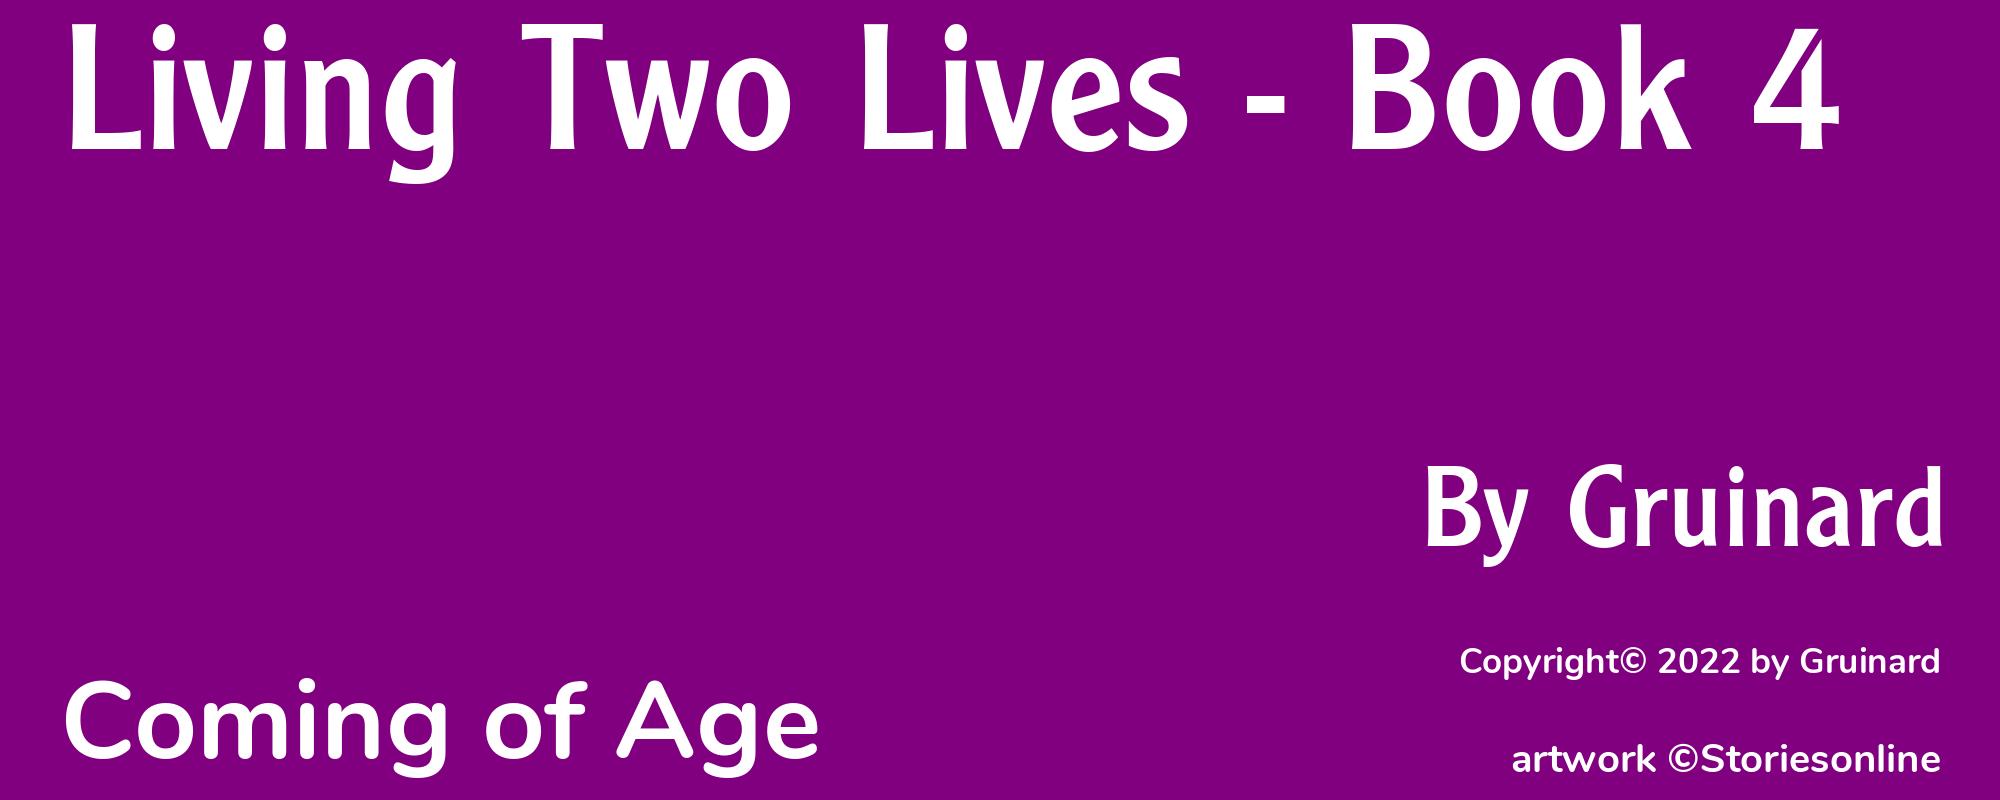 Living Two Lives - Book 4 - Cover